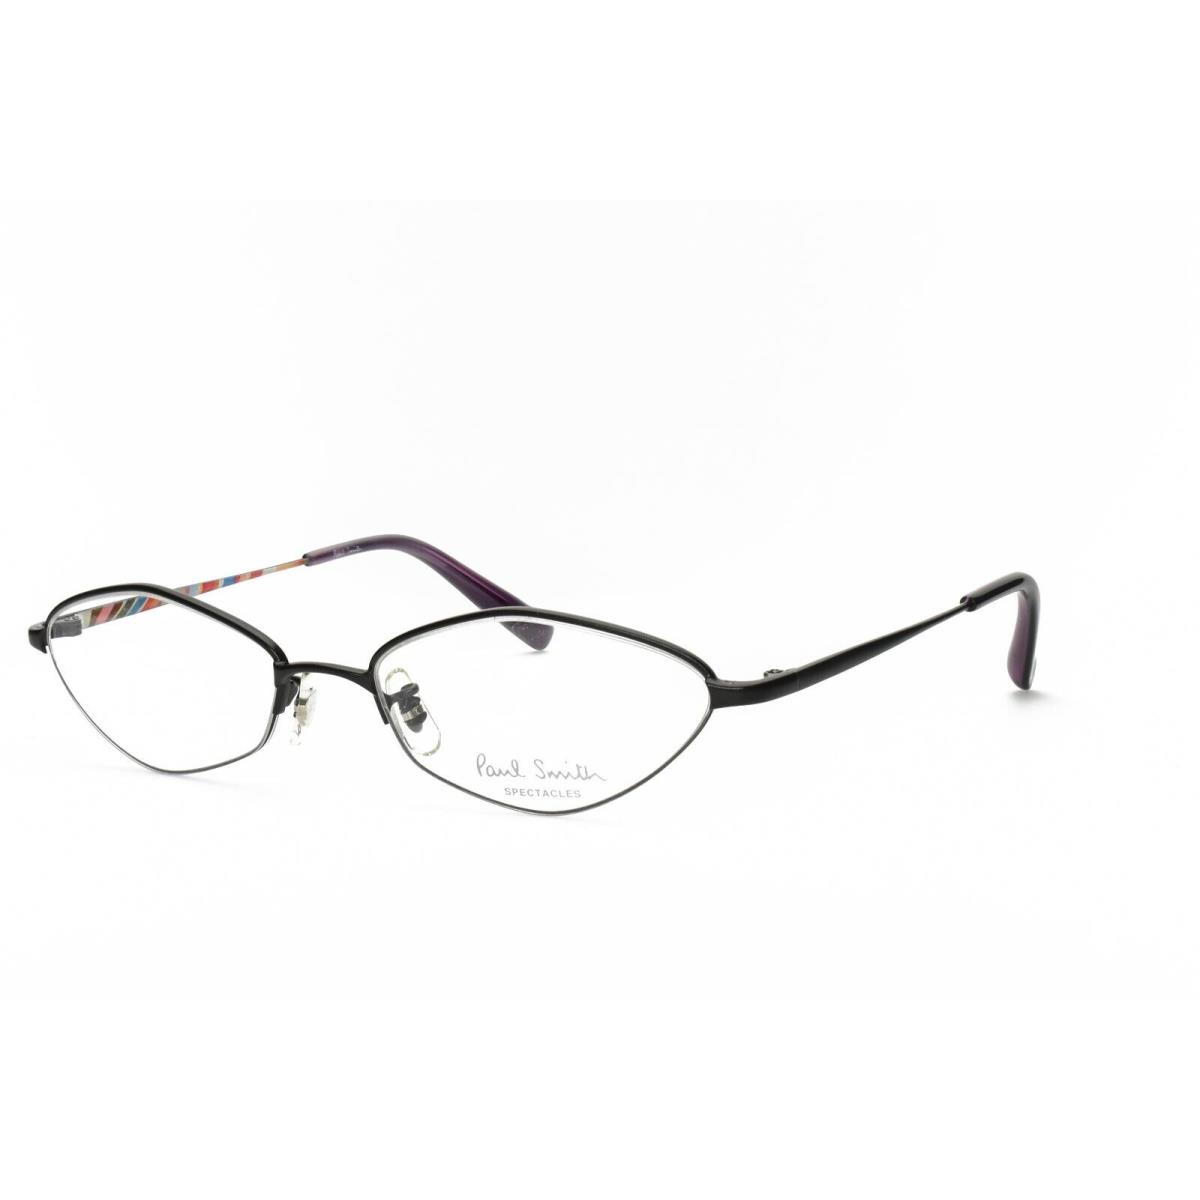 Paul Smith PS 1003 OX Eyeglasses Frames Only 51-17-138